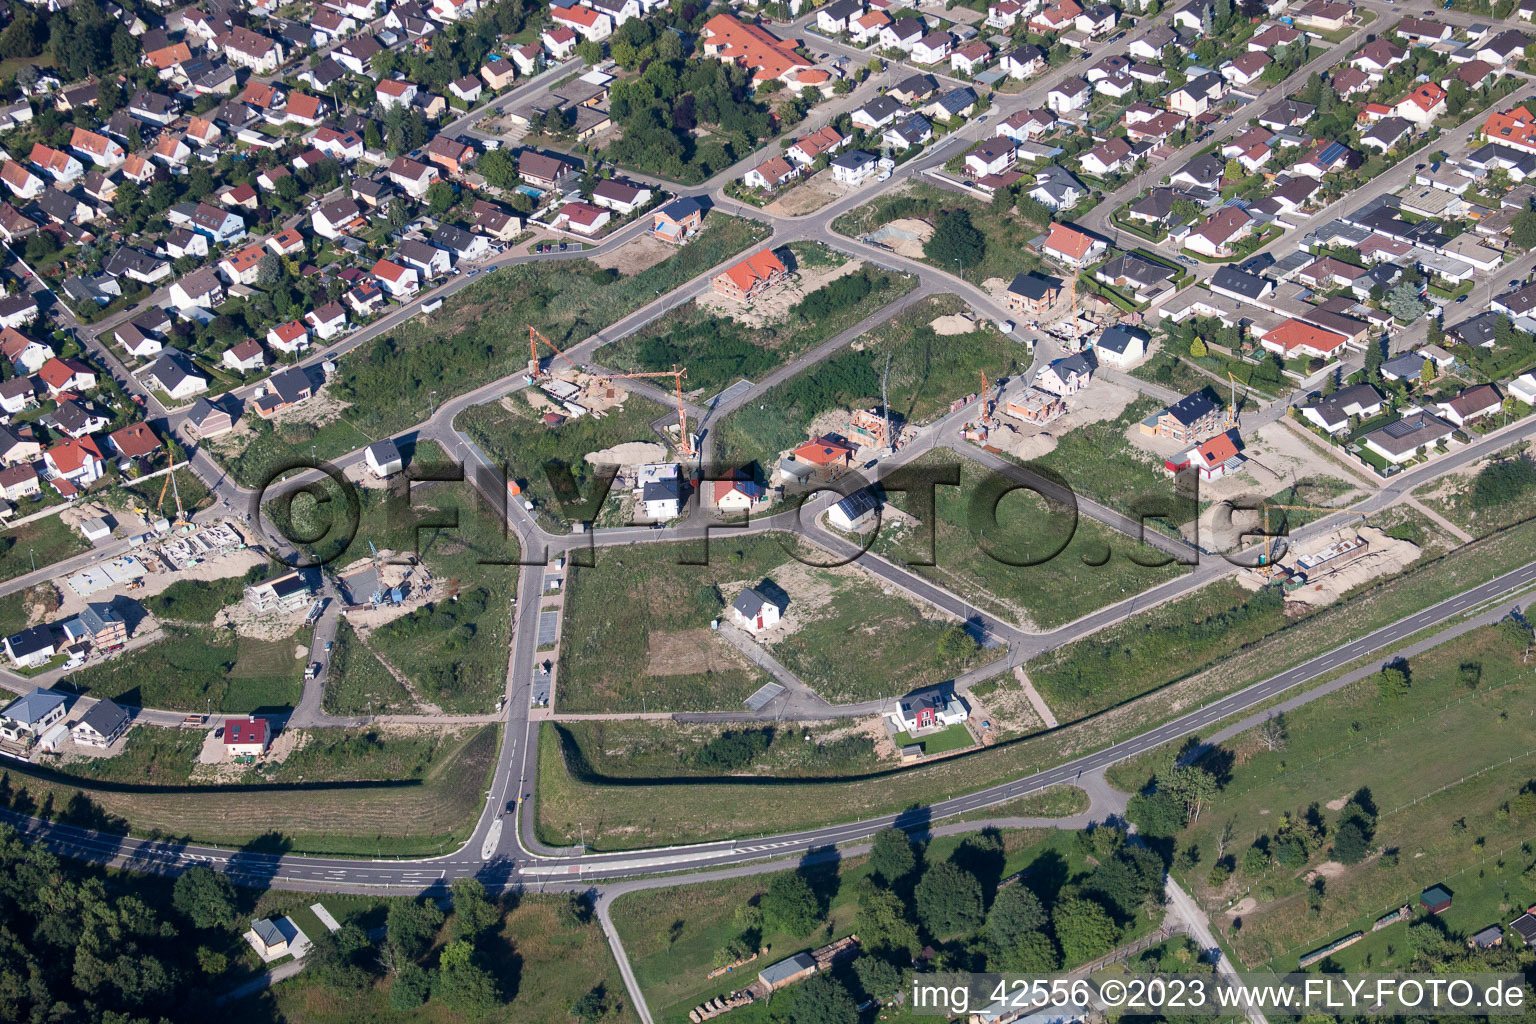 Drone image of New development area west in Jockgrim in the state Rhineland-Palatinate, Germany